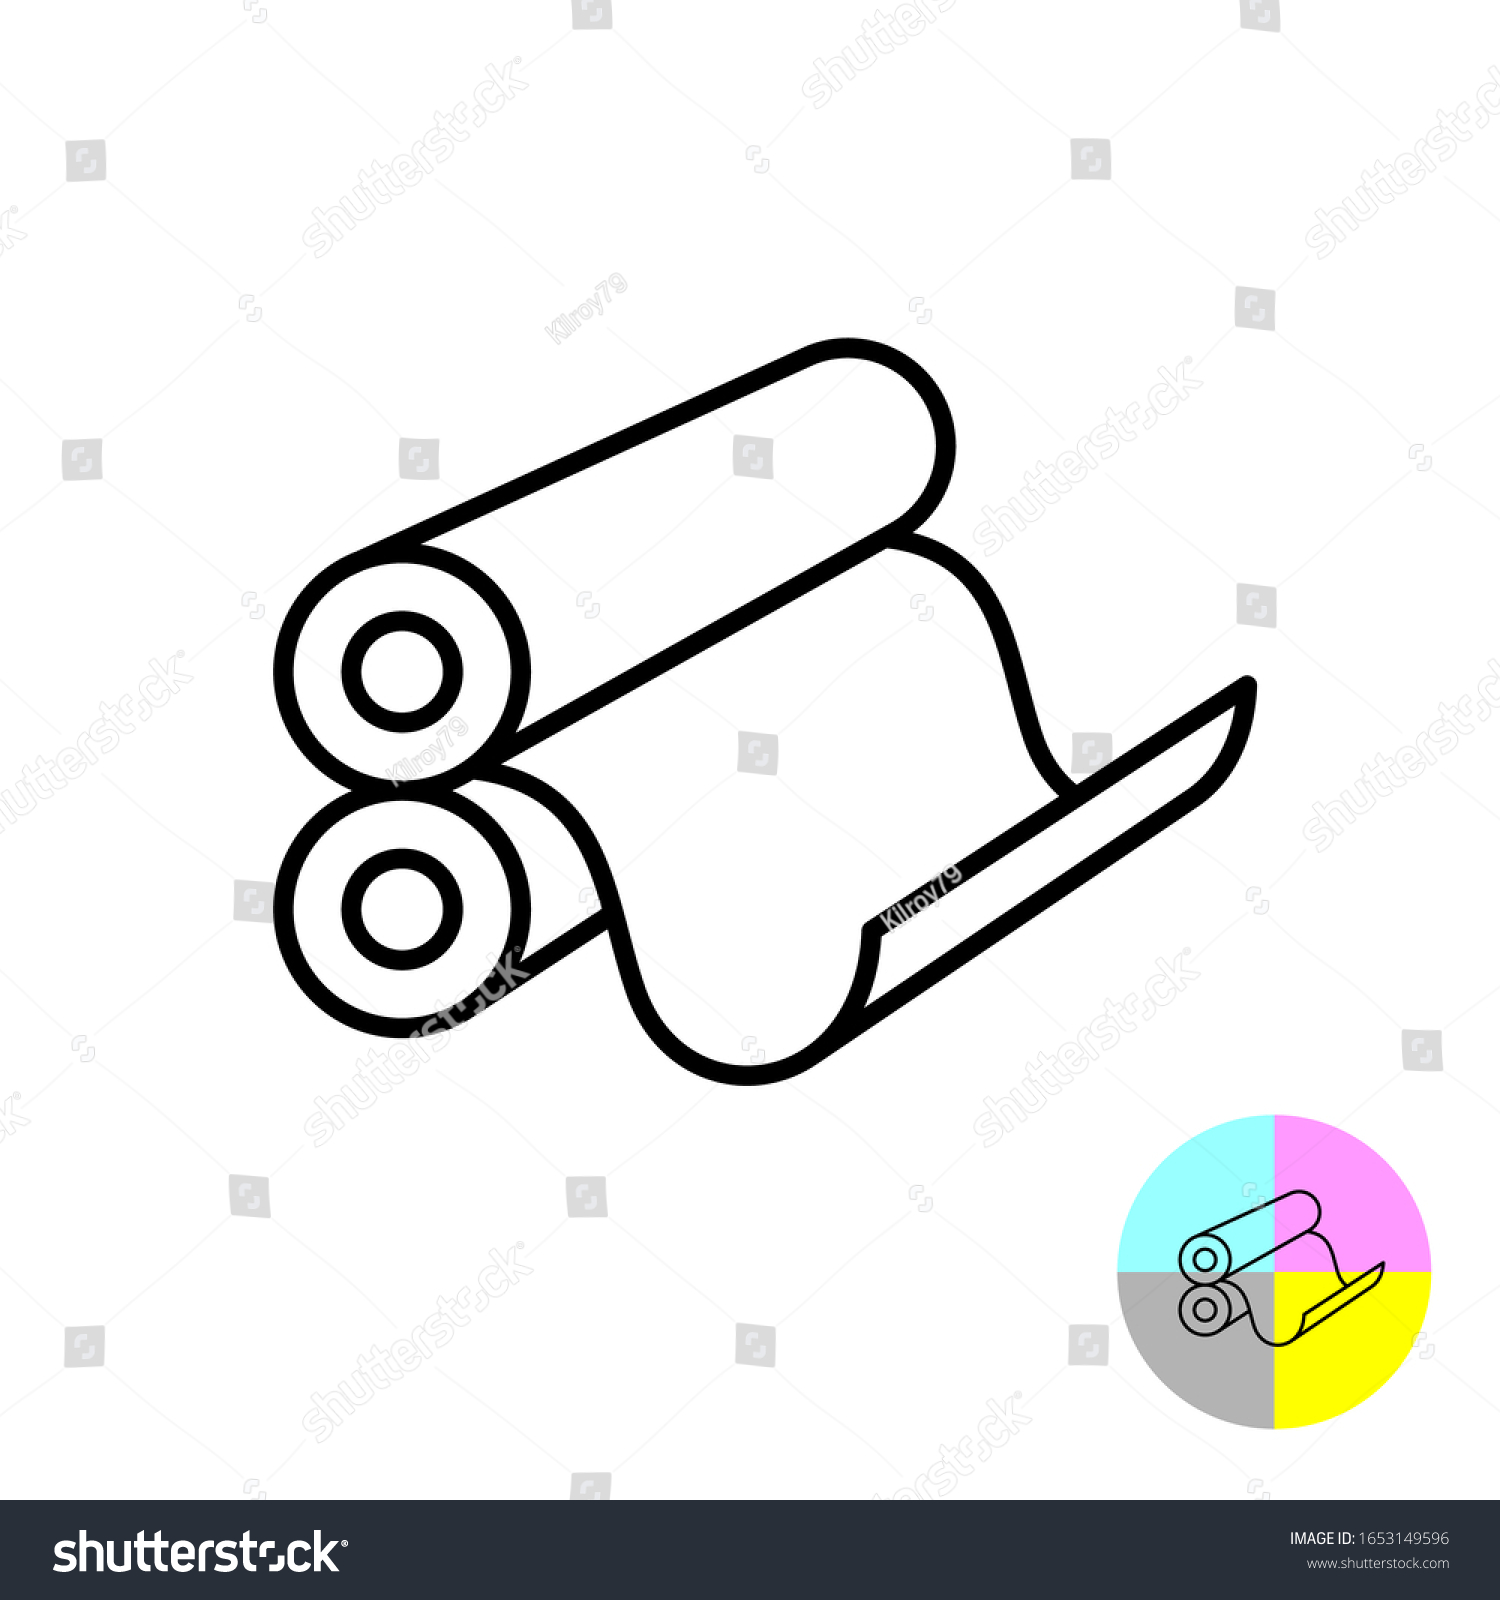 SVG of Printing rollers icon. 3D typography print symbol with round drums and paper sheet of newspaper or magazine. Adjustable stroke width.  svg